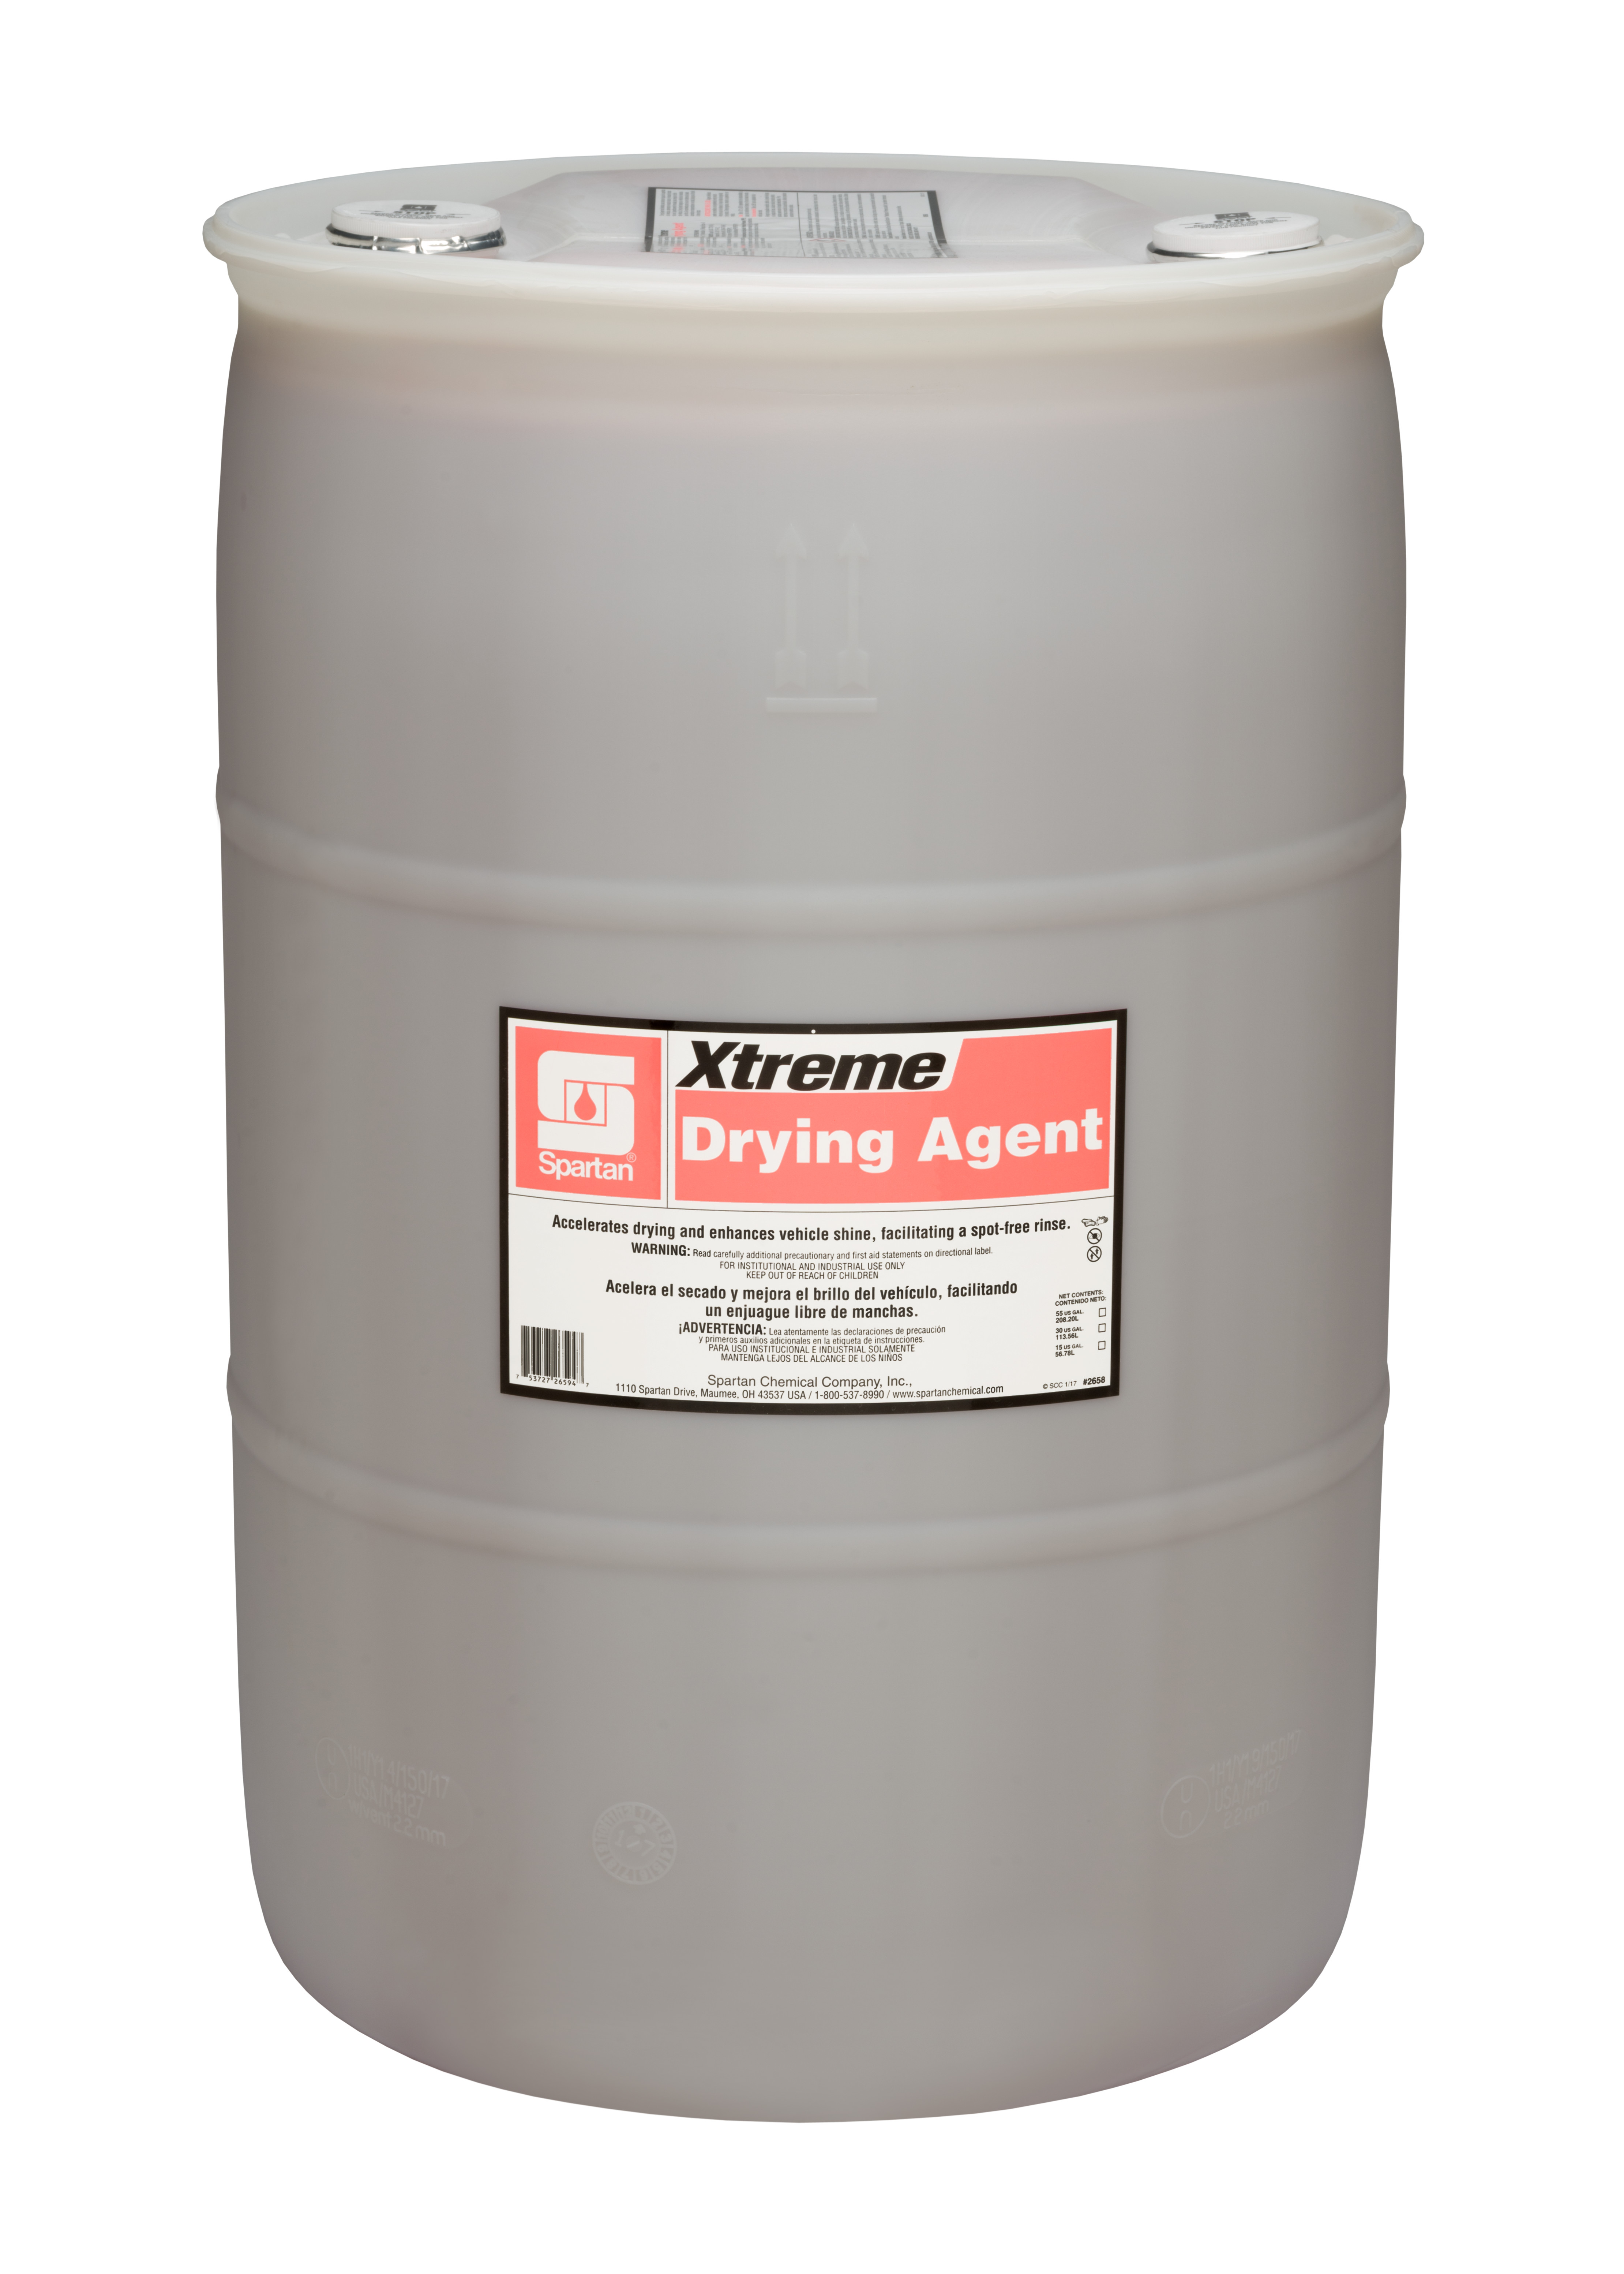 Spartan Chemical Company Xtreme Drying Agent, 55 GAL DRUM